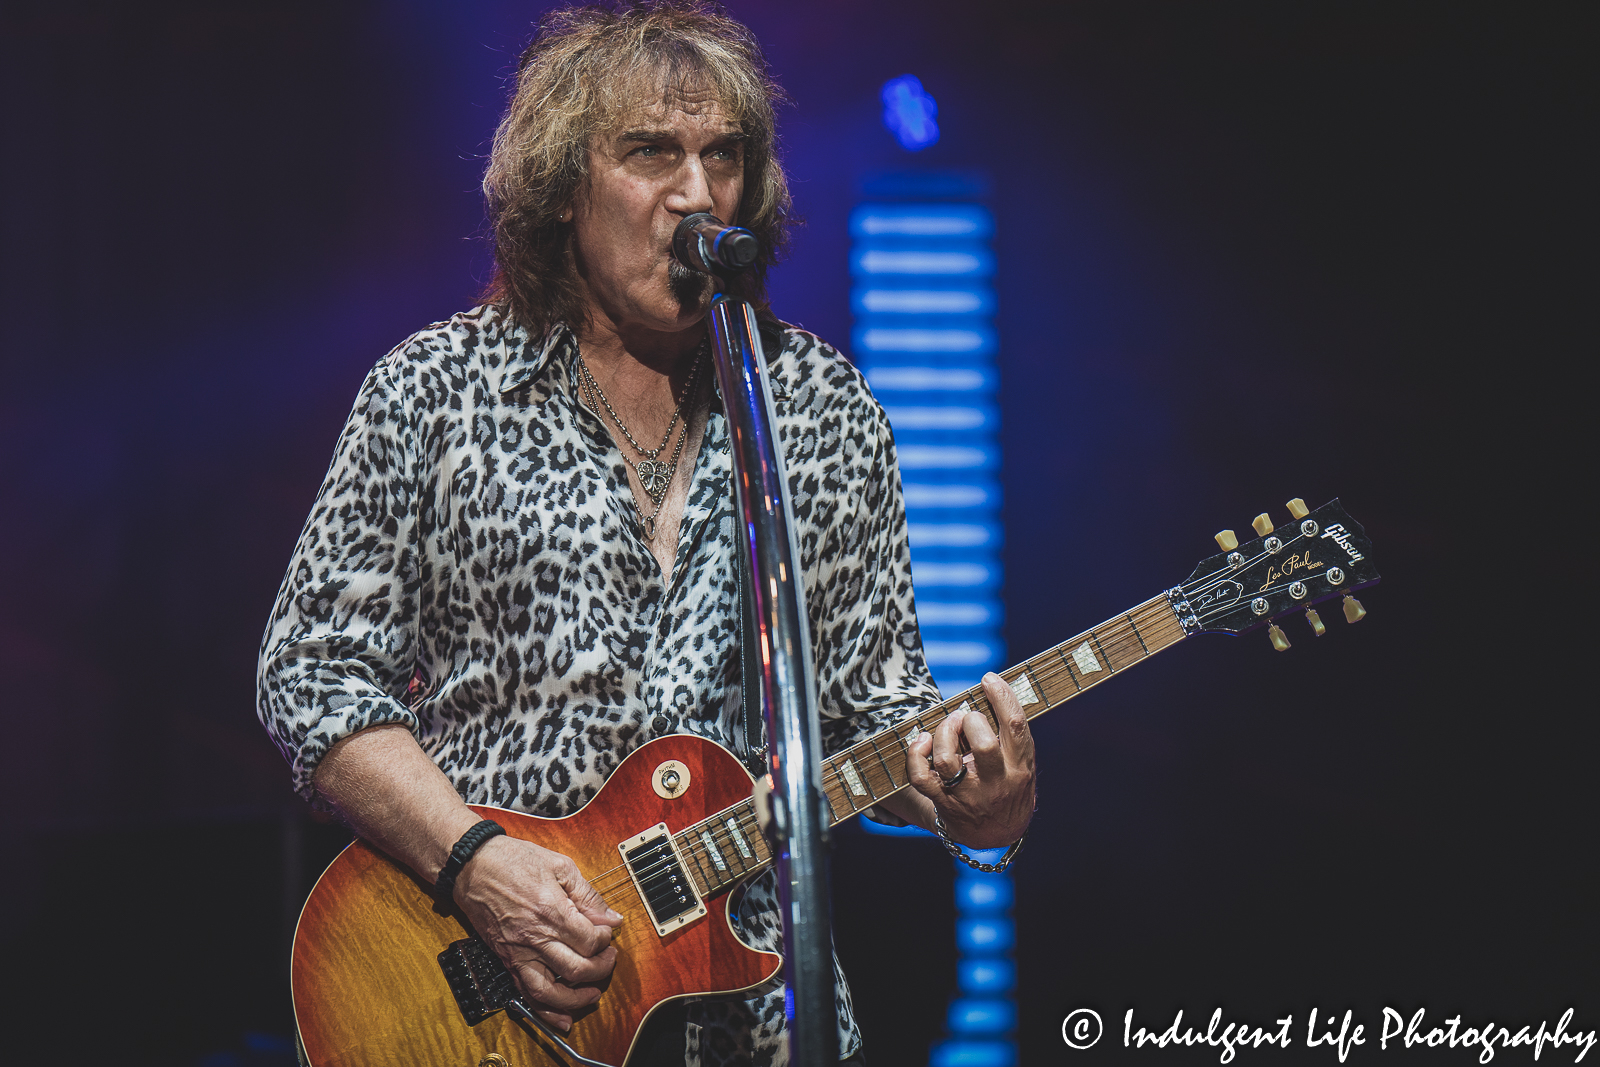 Guitarist Dave Amato of REO Speedwagon live in concert at Starlight Theatre in Kansas City, MO on June 14, 2022.